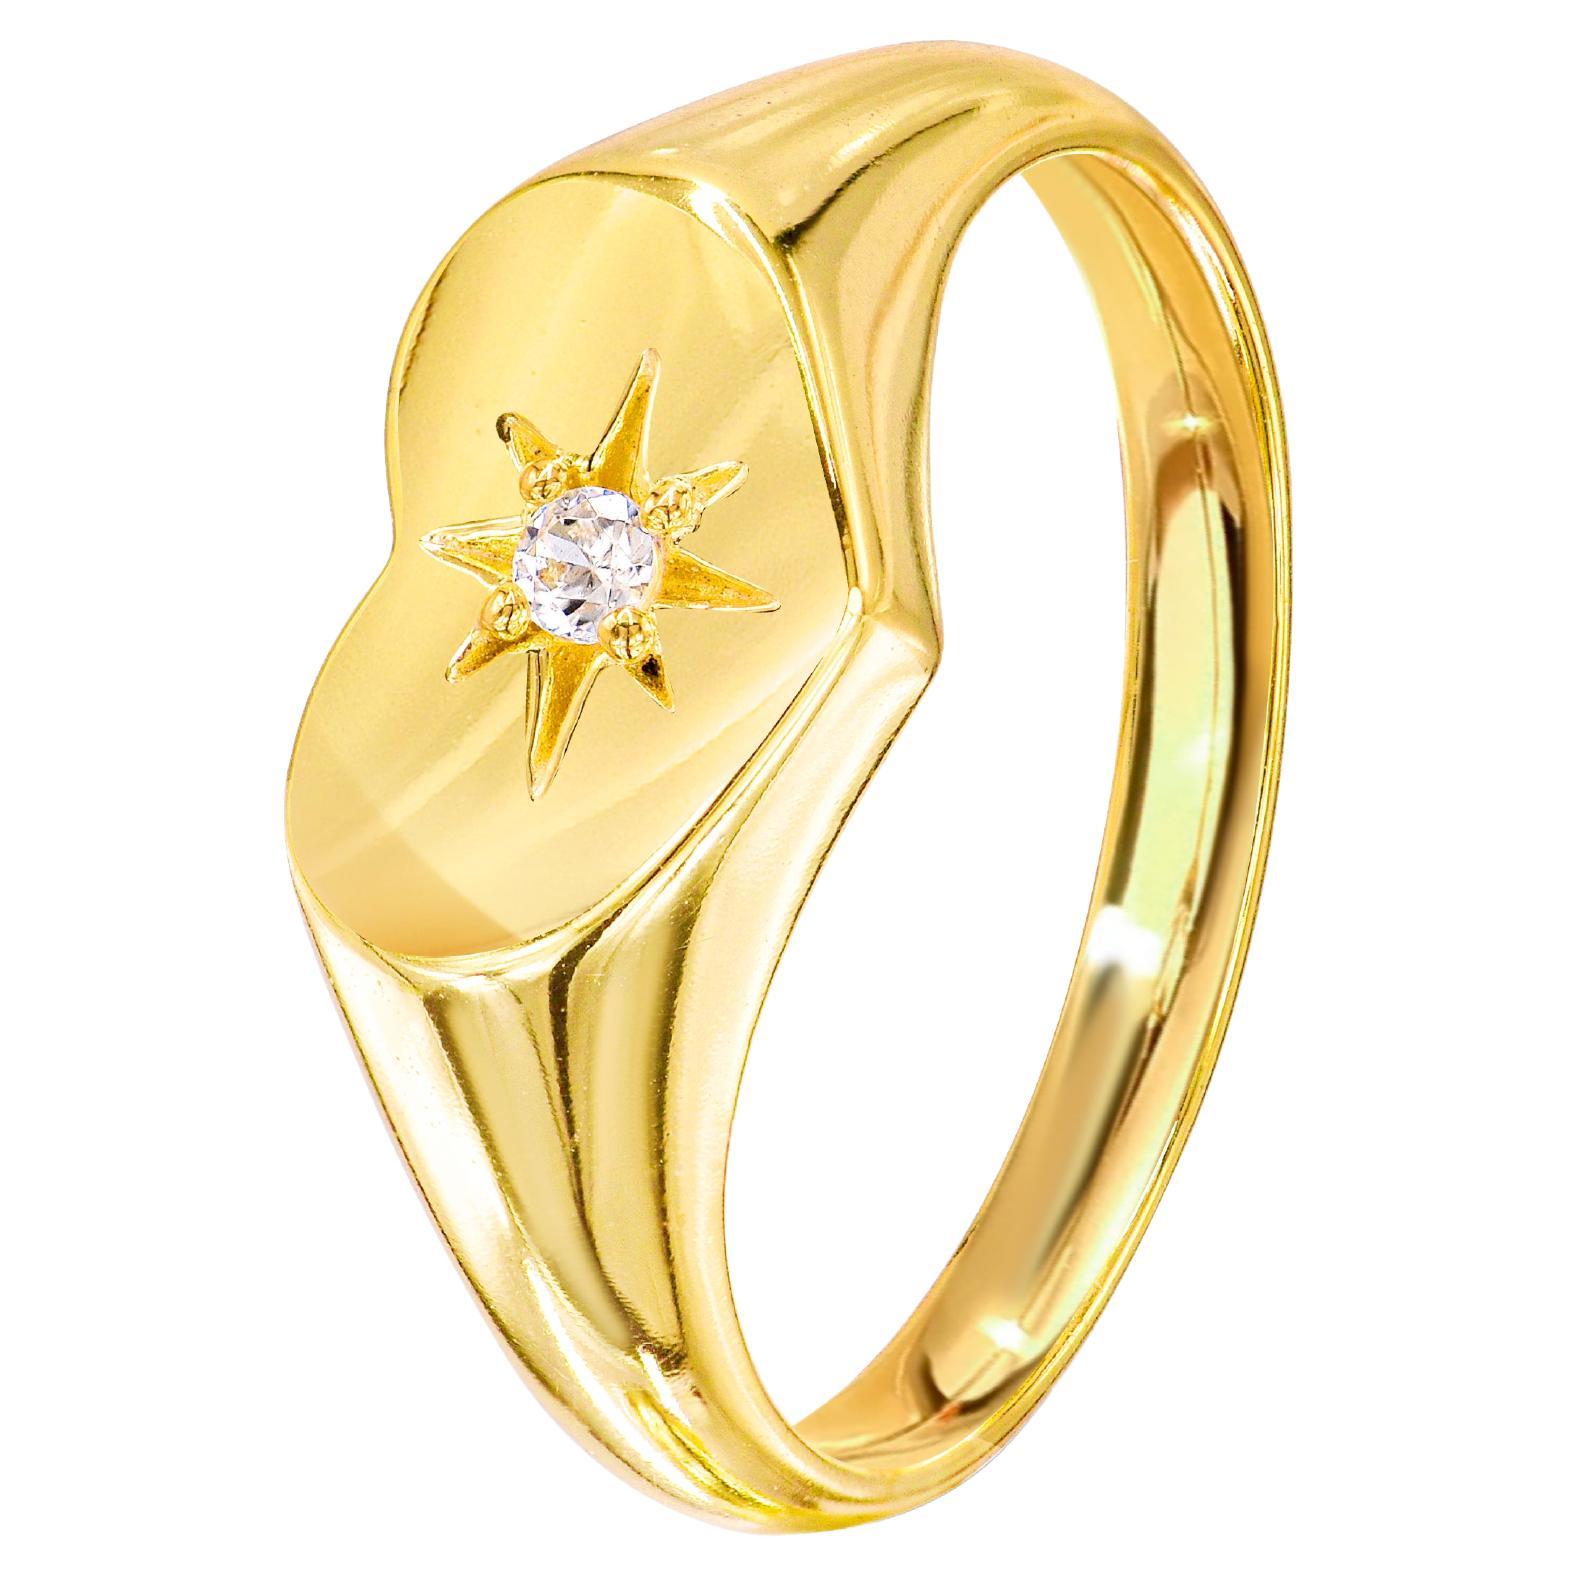 18K Genuine Gold Filled Heart Shape Signet Ring with 0.03 Carat Natural Diamond